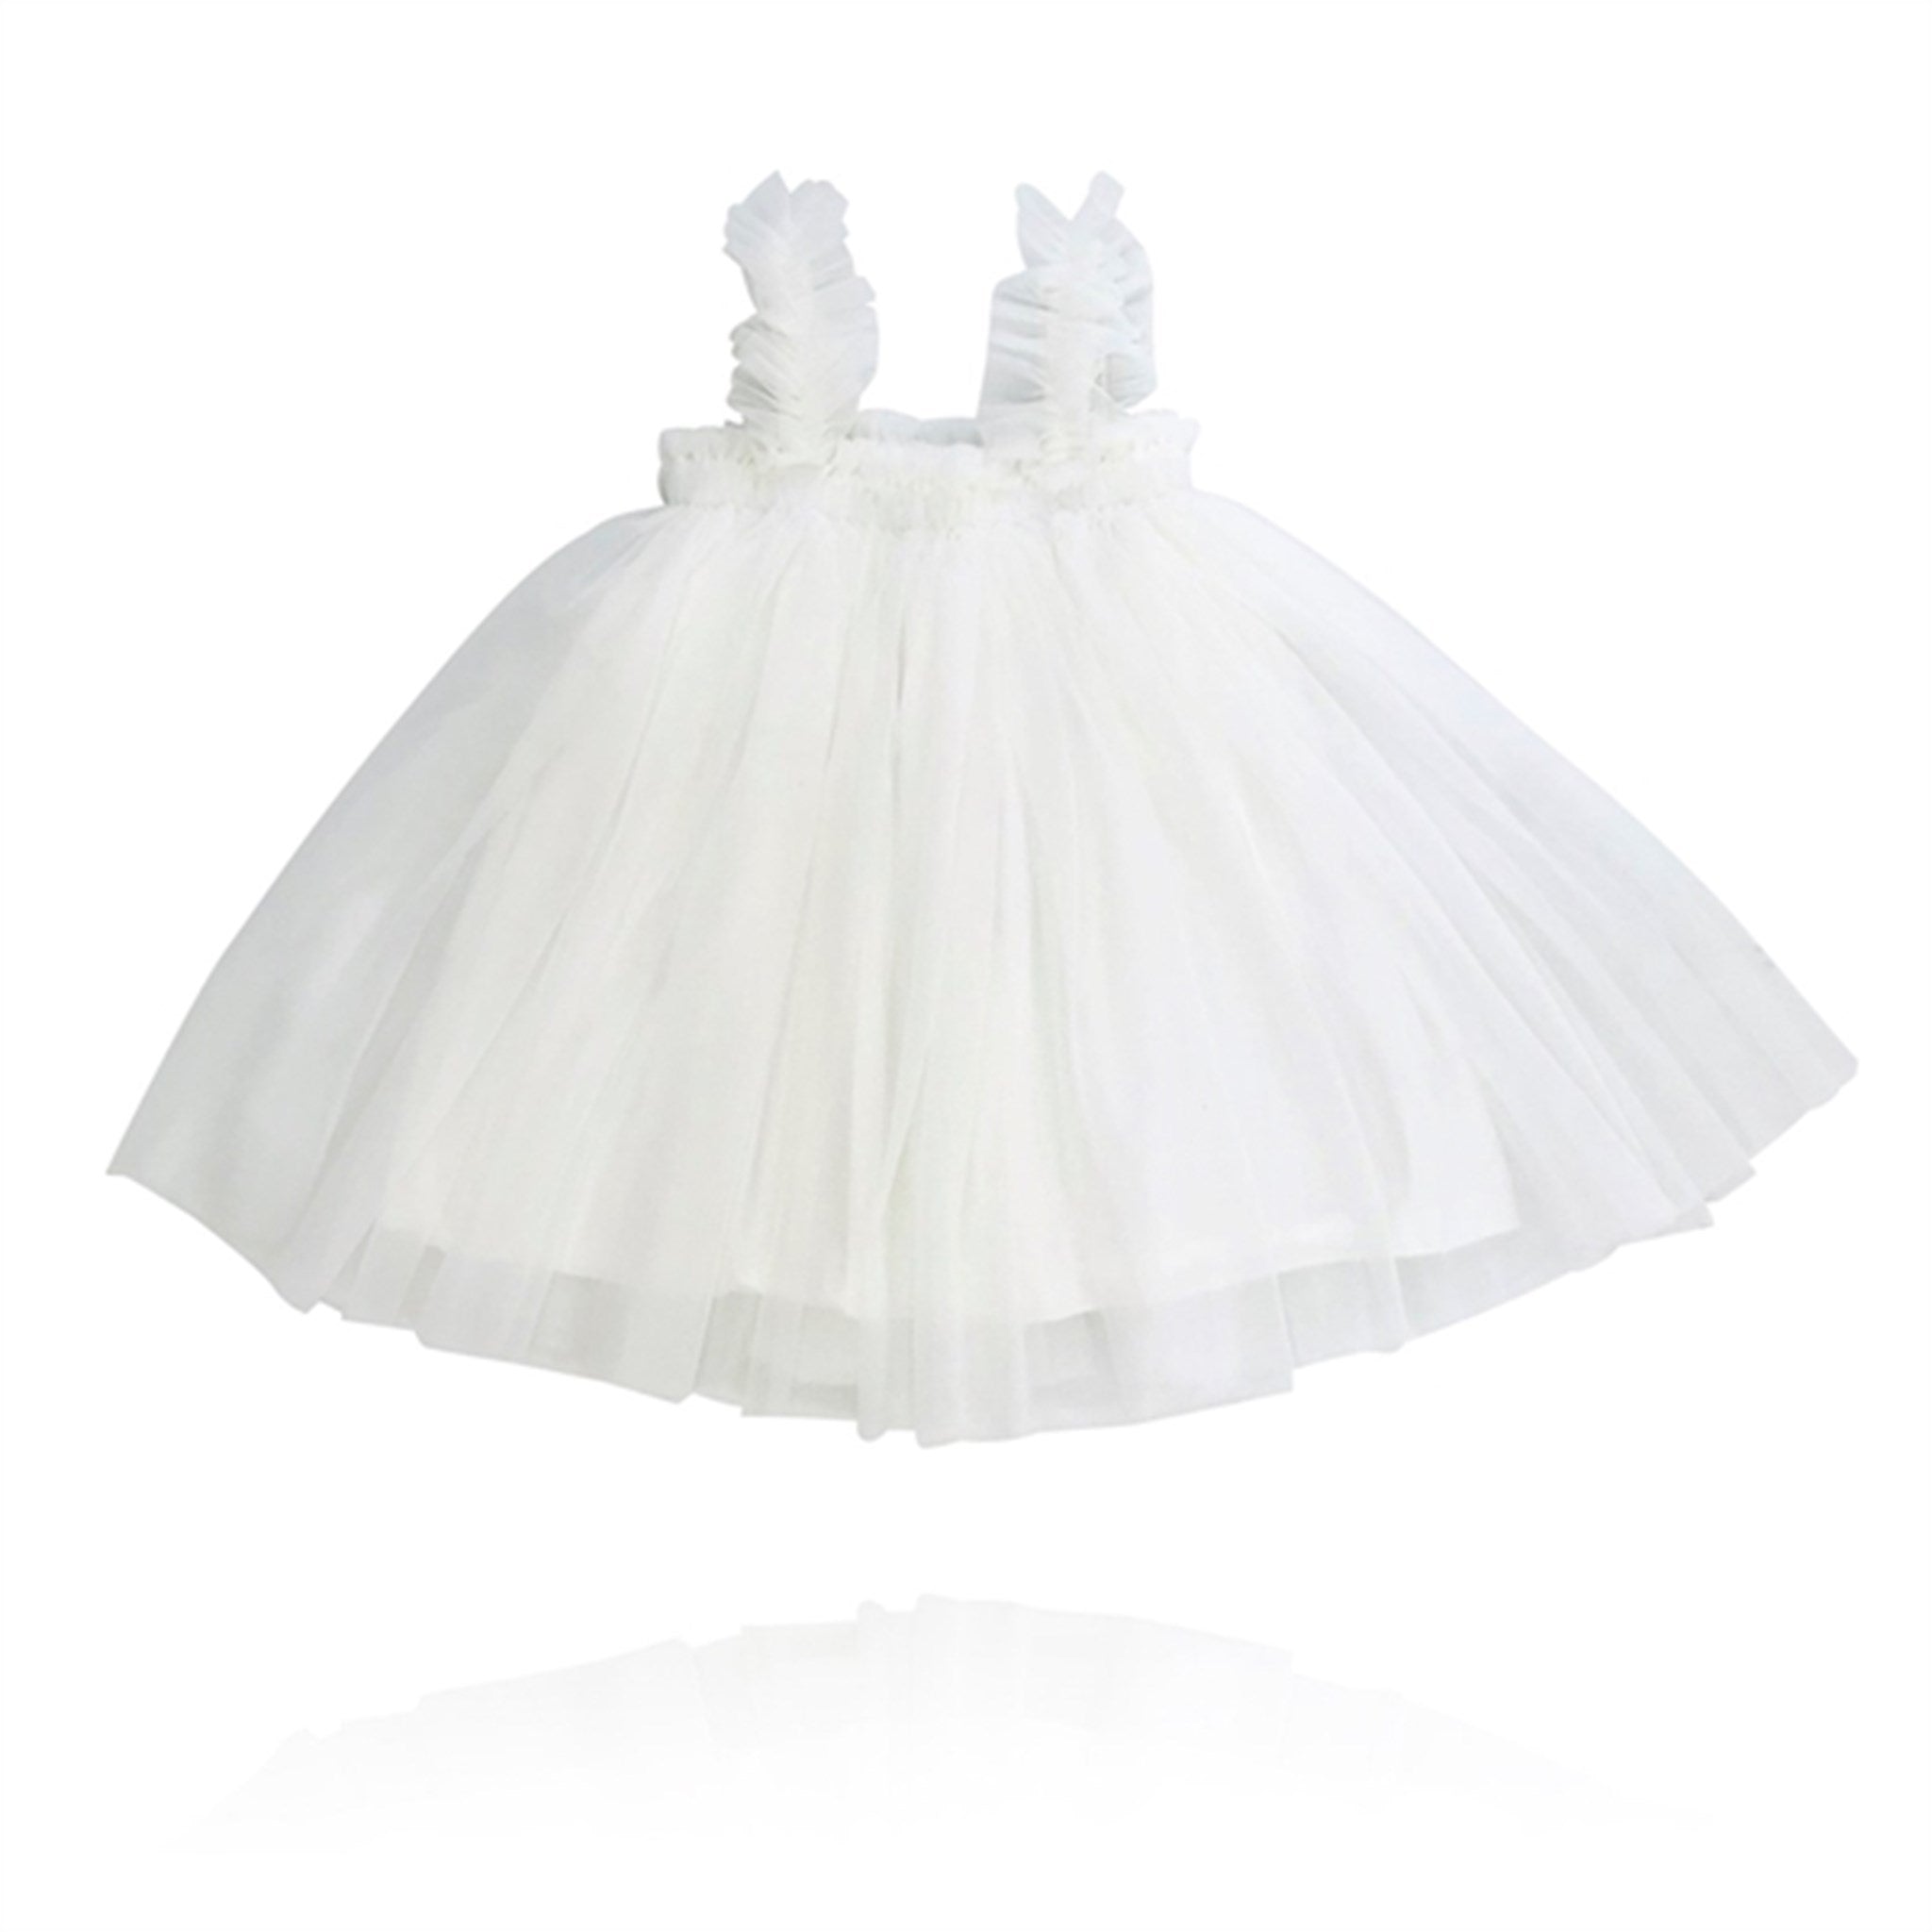 Dolly by Le Petit Tom Tutu Dress Beach Cover Up Ballet White